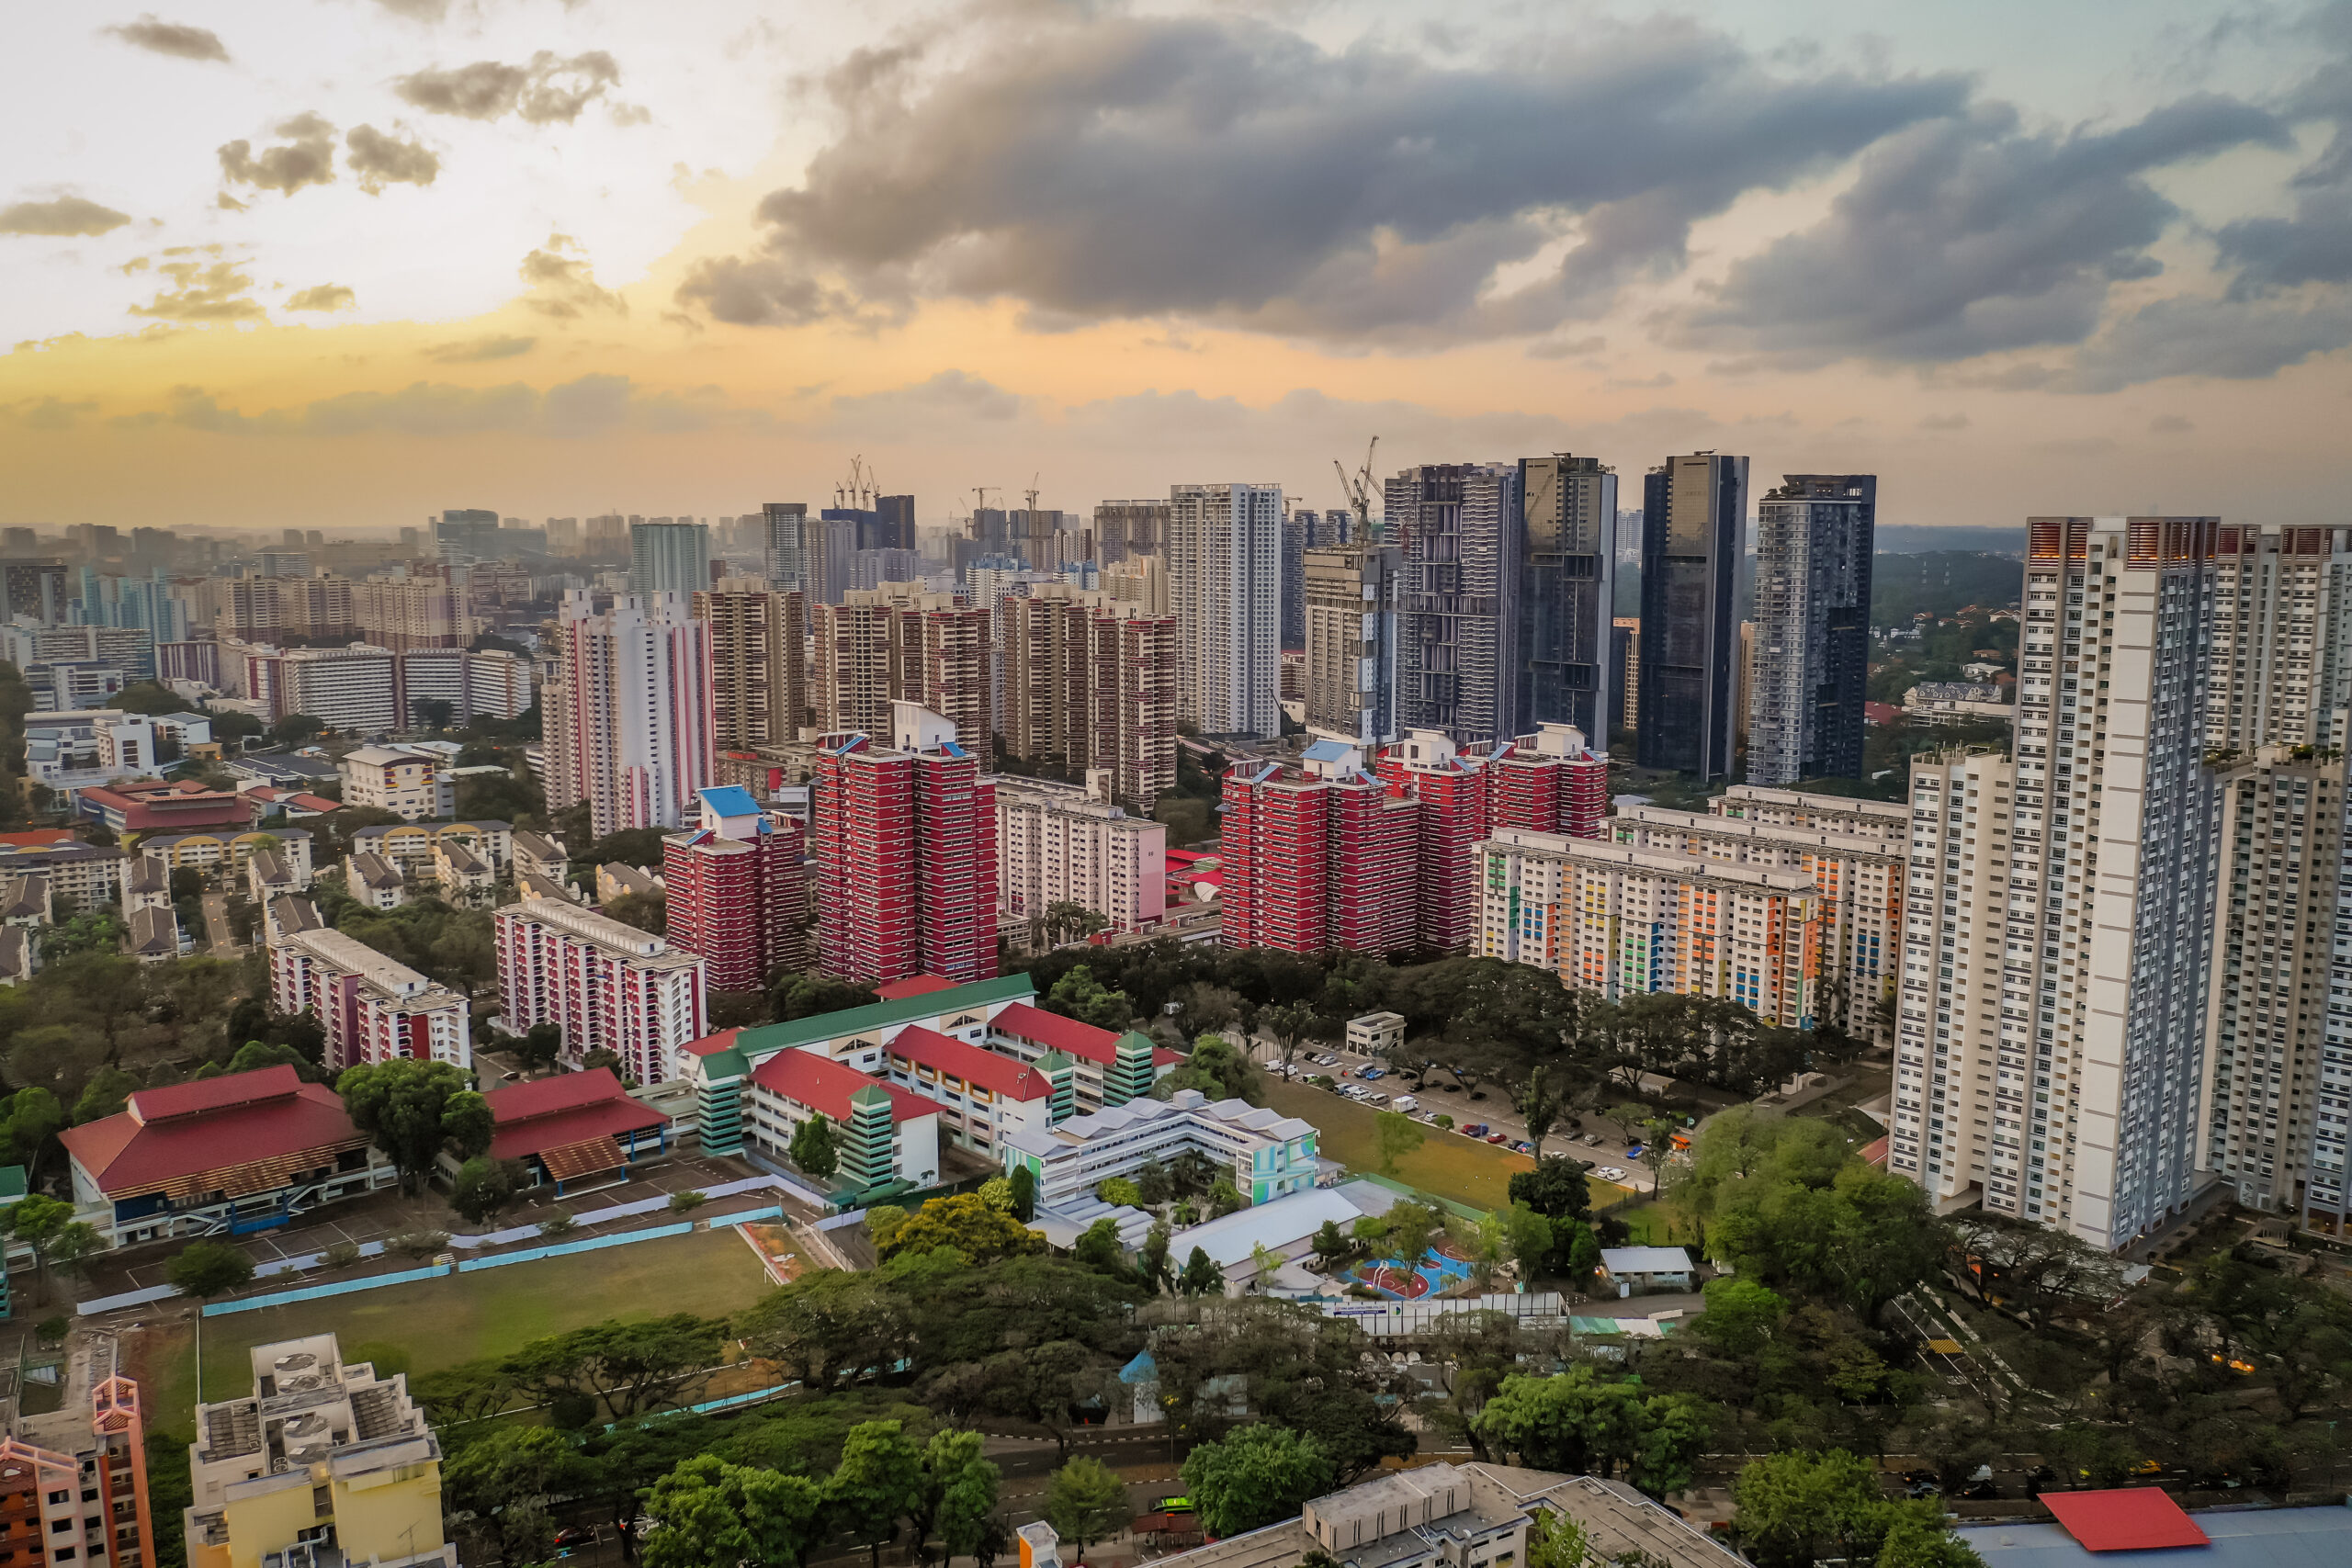 A aerial view of high-rise buildings and HDB flats in Bukit Merah